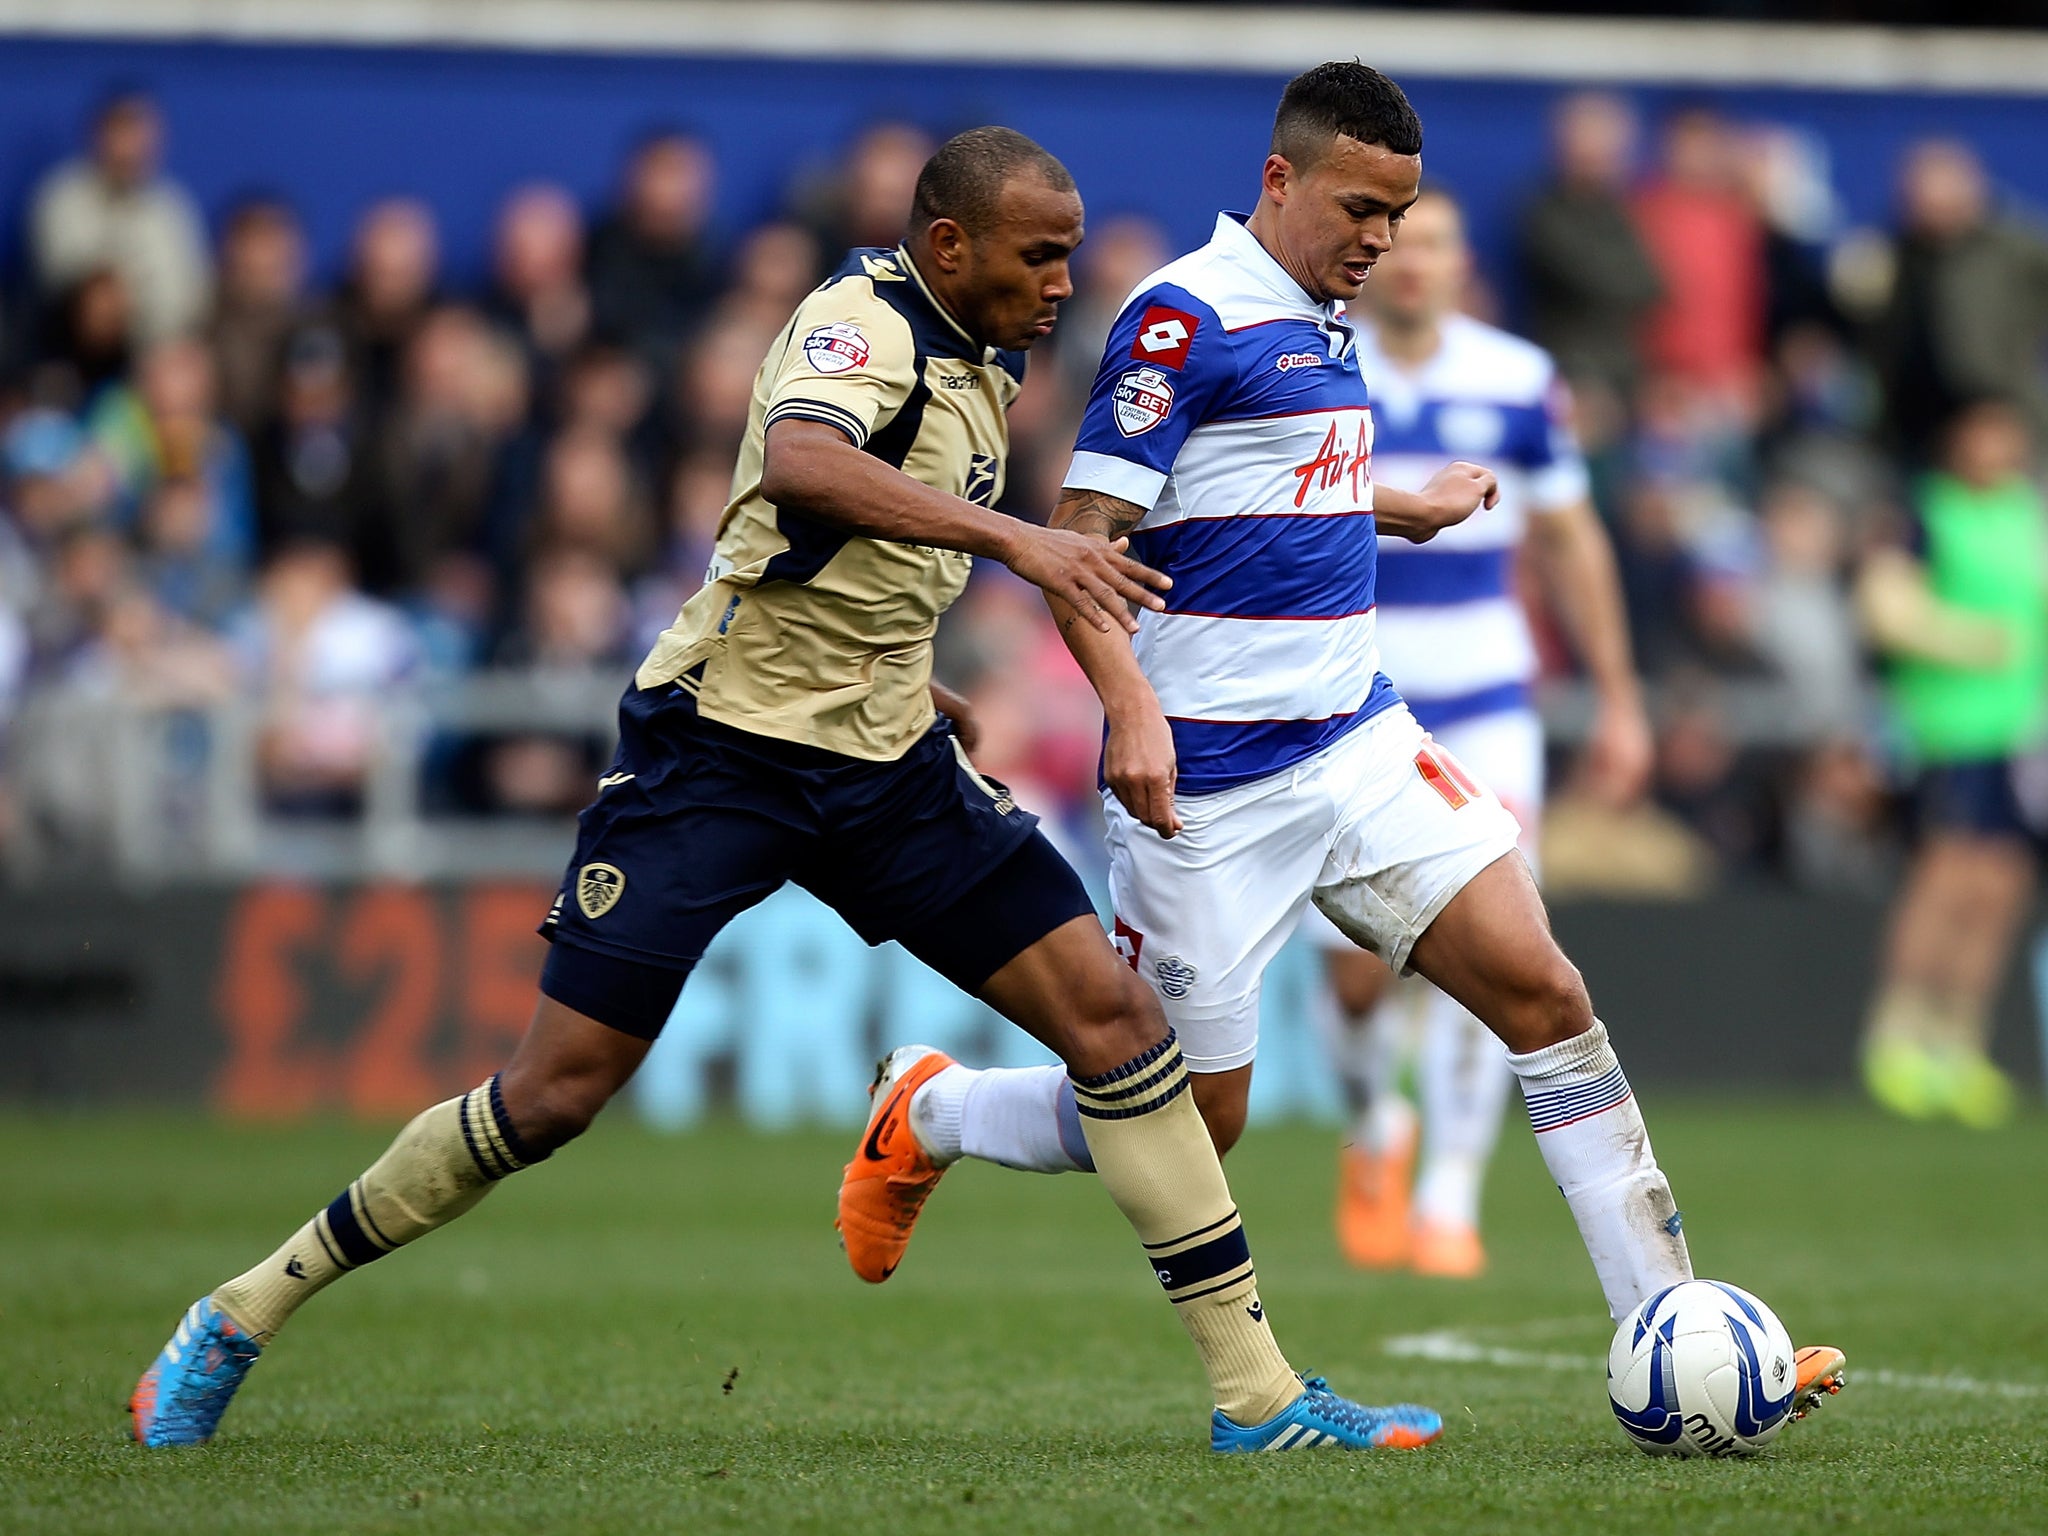 Queens Park Rangers midfielder Jermaine Jenas scored an equaliser for QPR in their 1-1 draw with Leeds